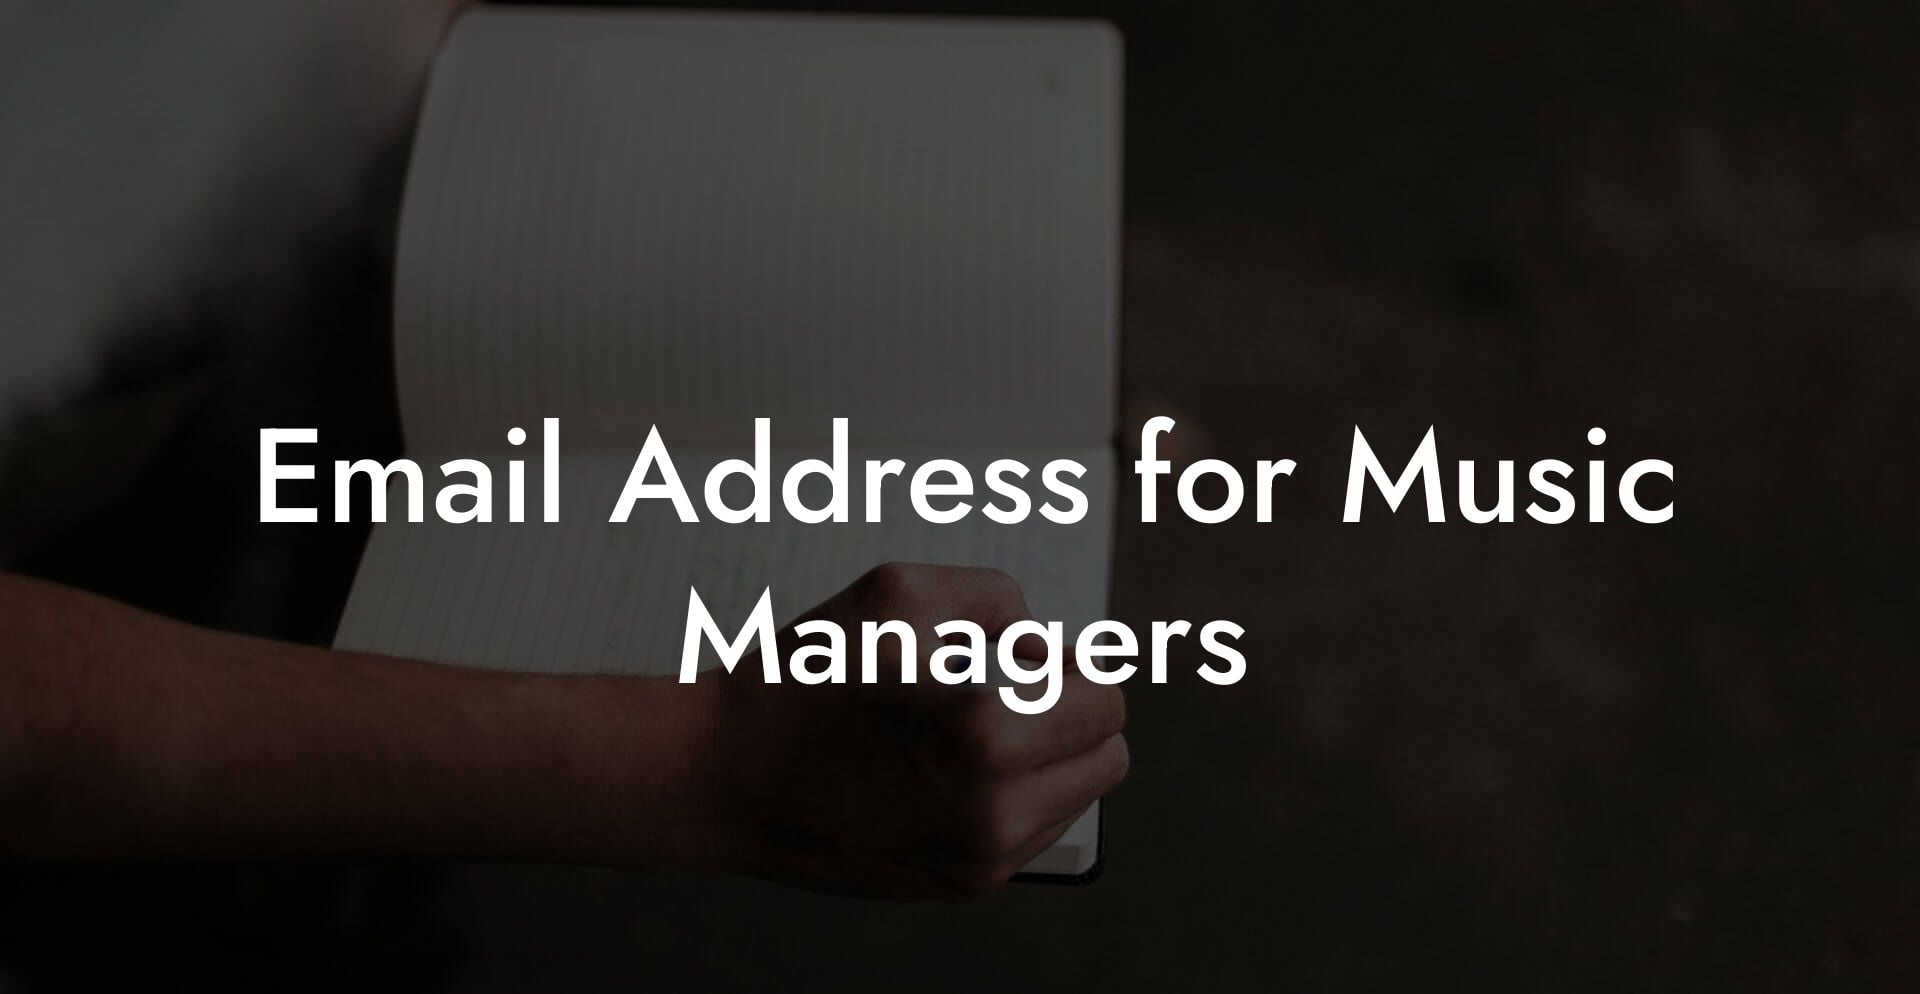 Email Address for Music Managers